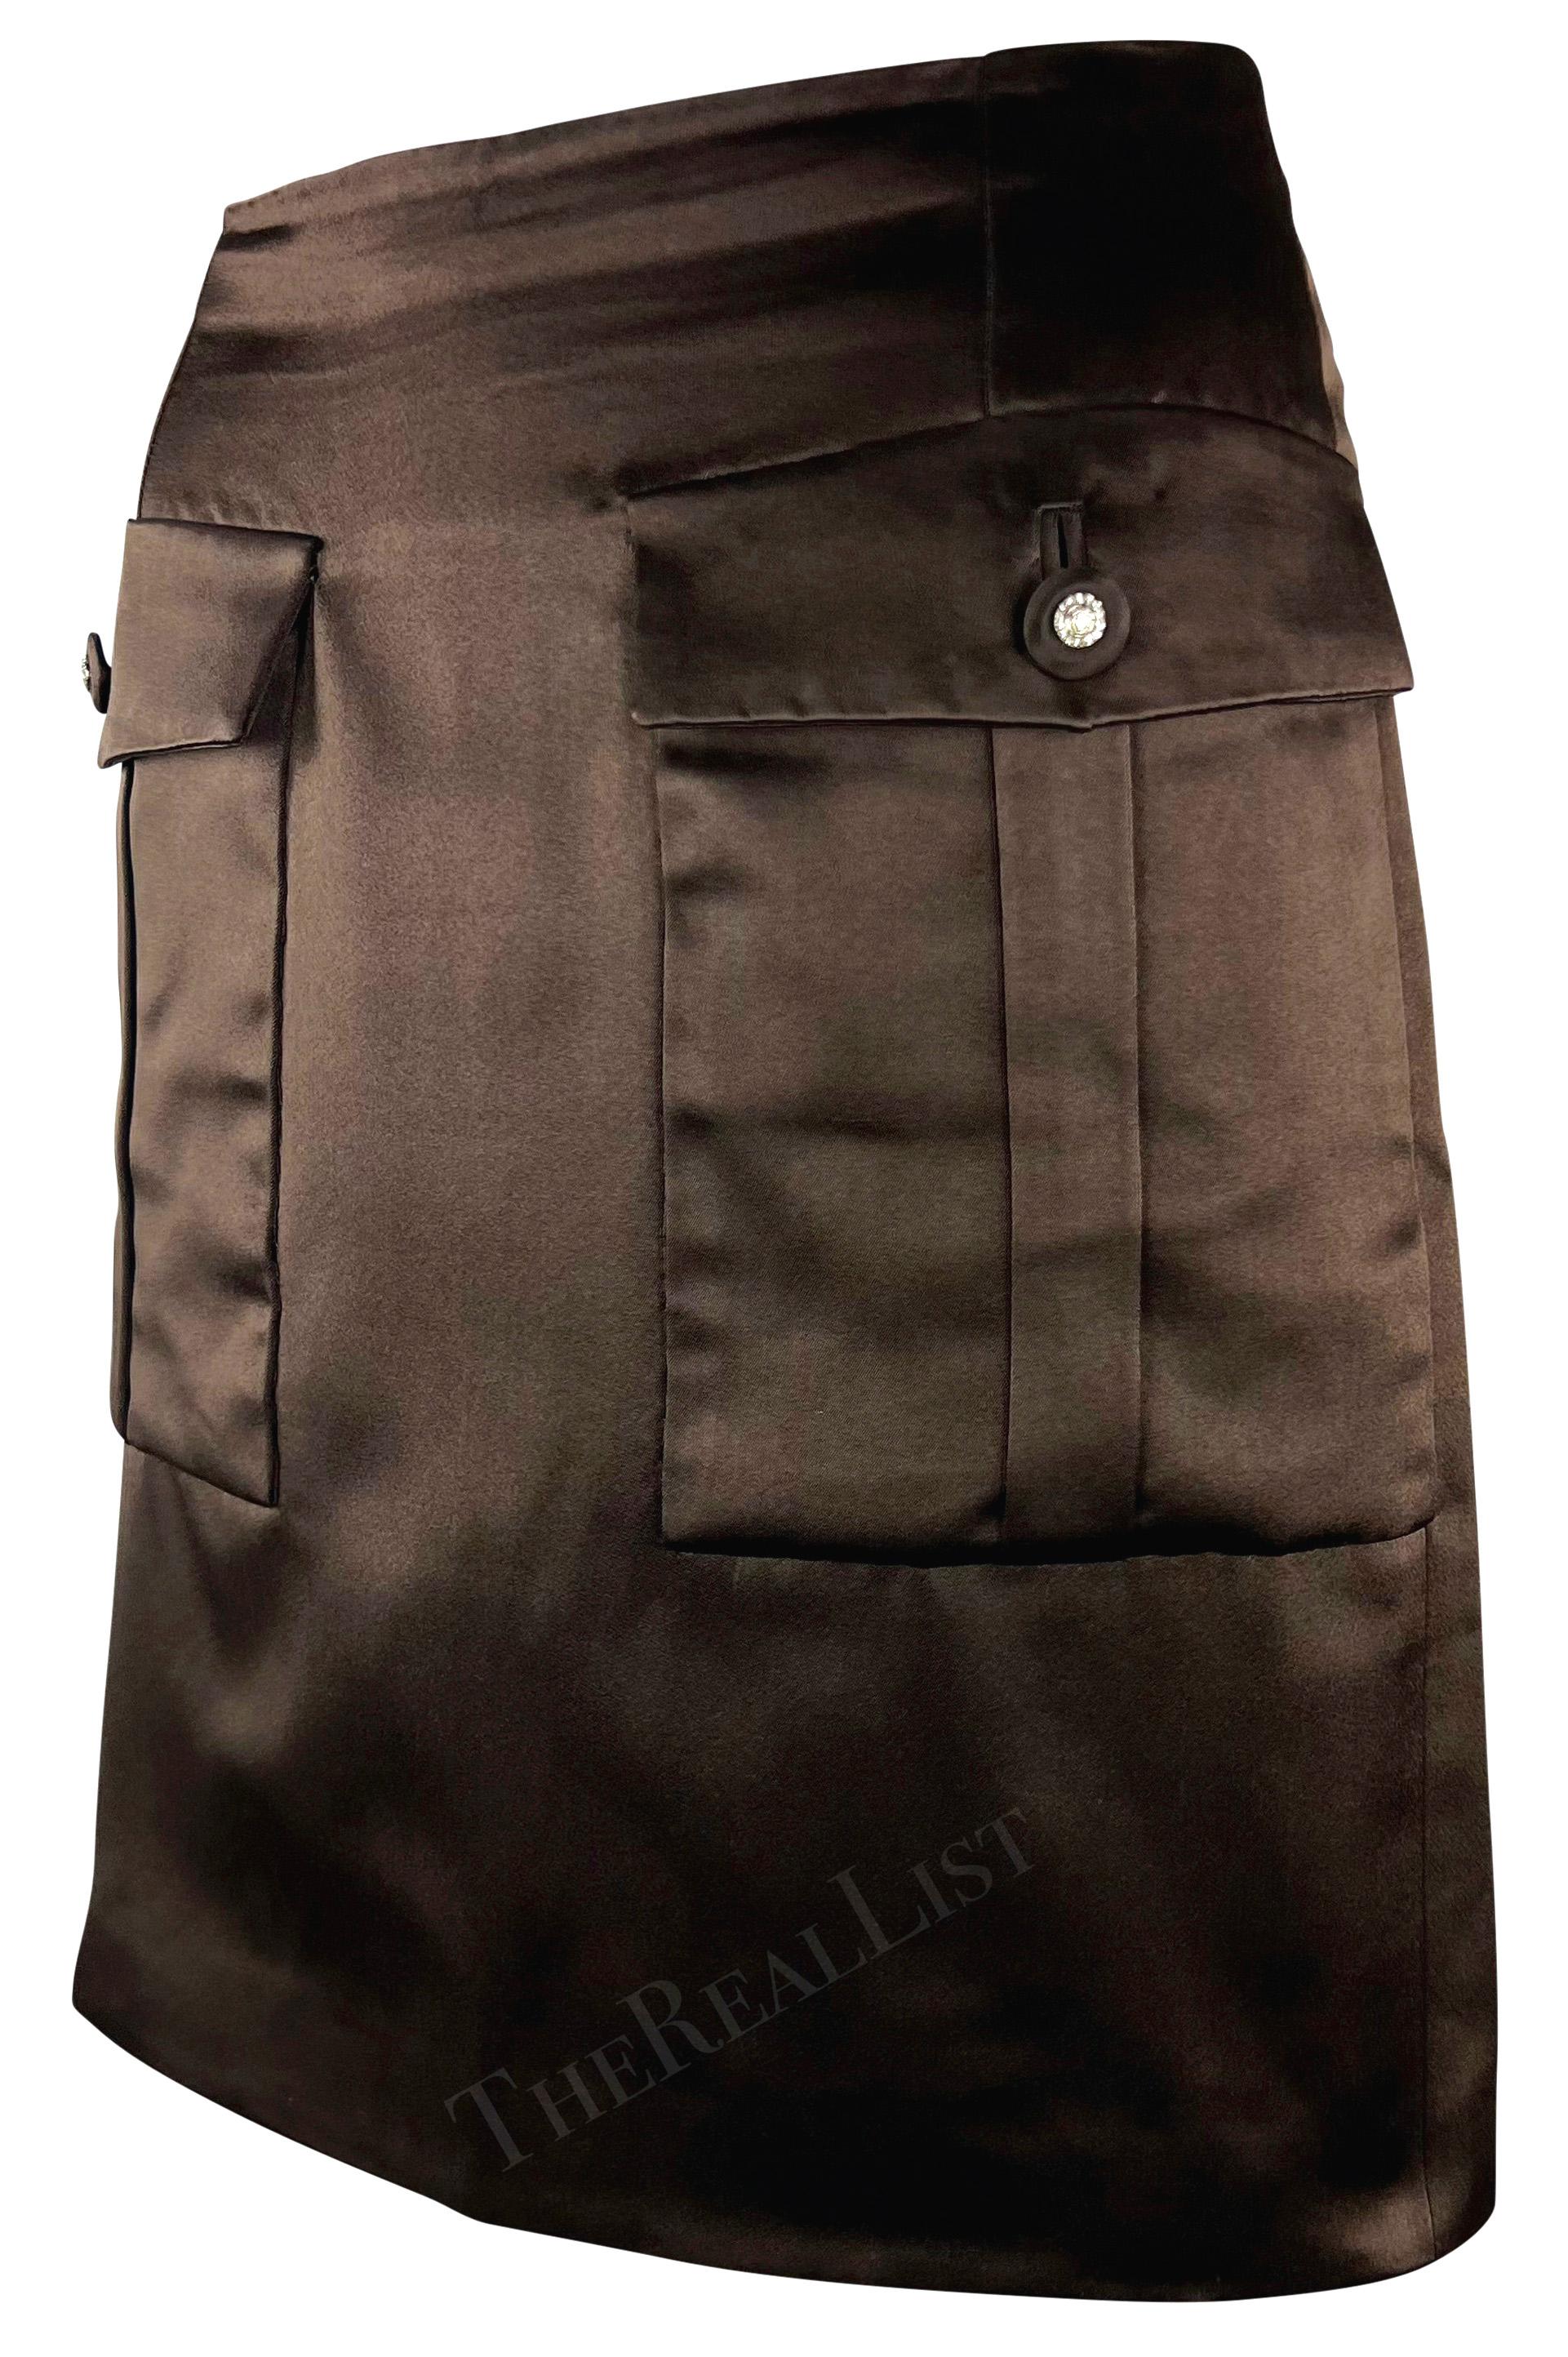 Introducing a fabulous brown satin Gianni Versace short skirt, designed by  Gianni Versace for the Fall/Winter 1996 collection. This chic silk skirt, crafted entirely from brown satin, showcases two large flap pockets at the front embellished with